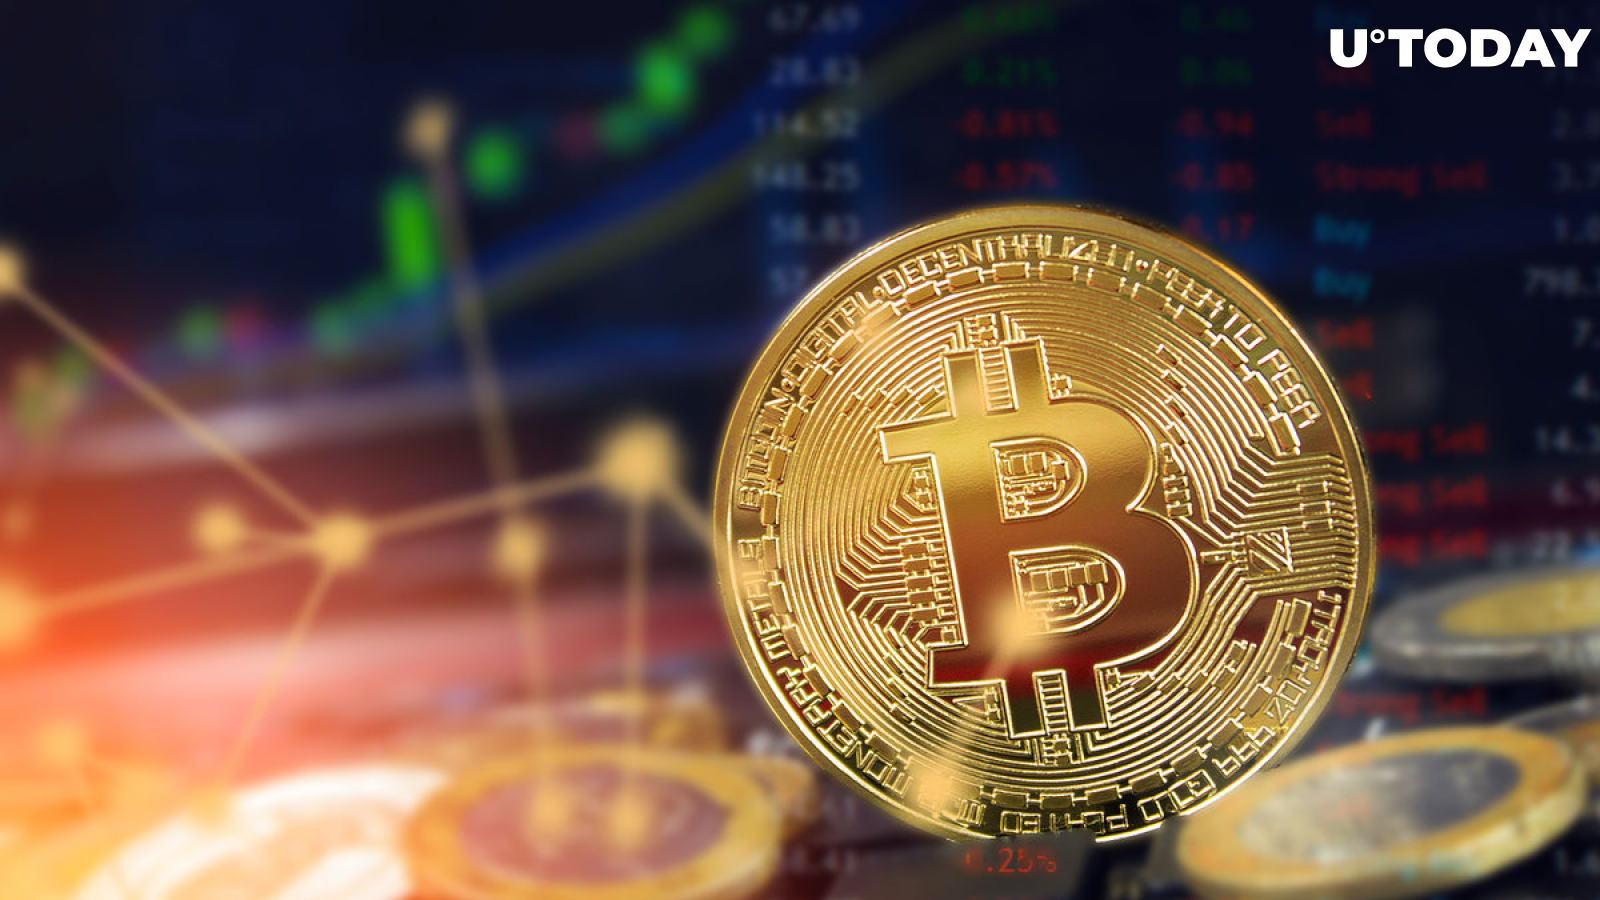 Bitcoin (BTC) Price Targets $48K Propelled by Historic Chinese New Year Gains